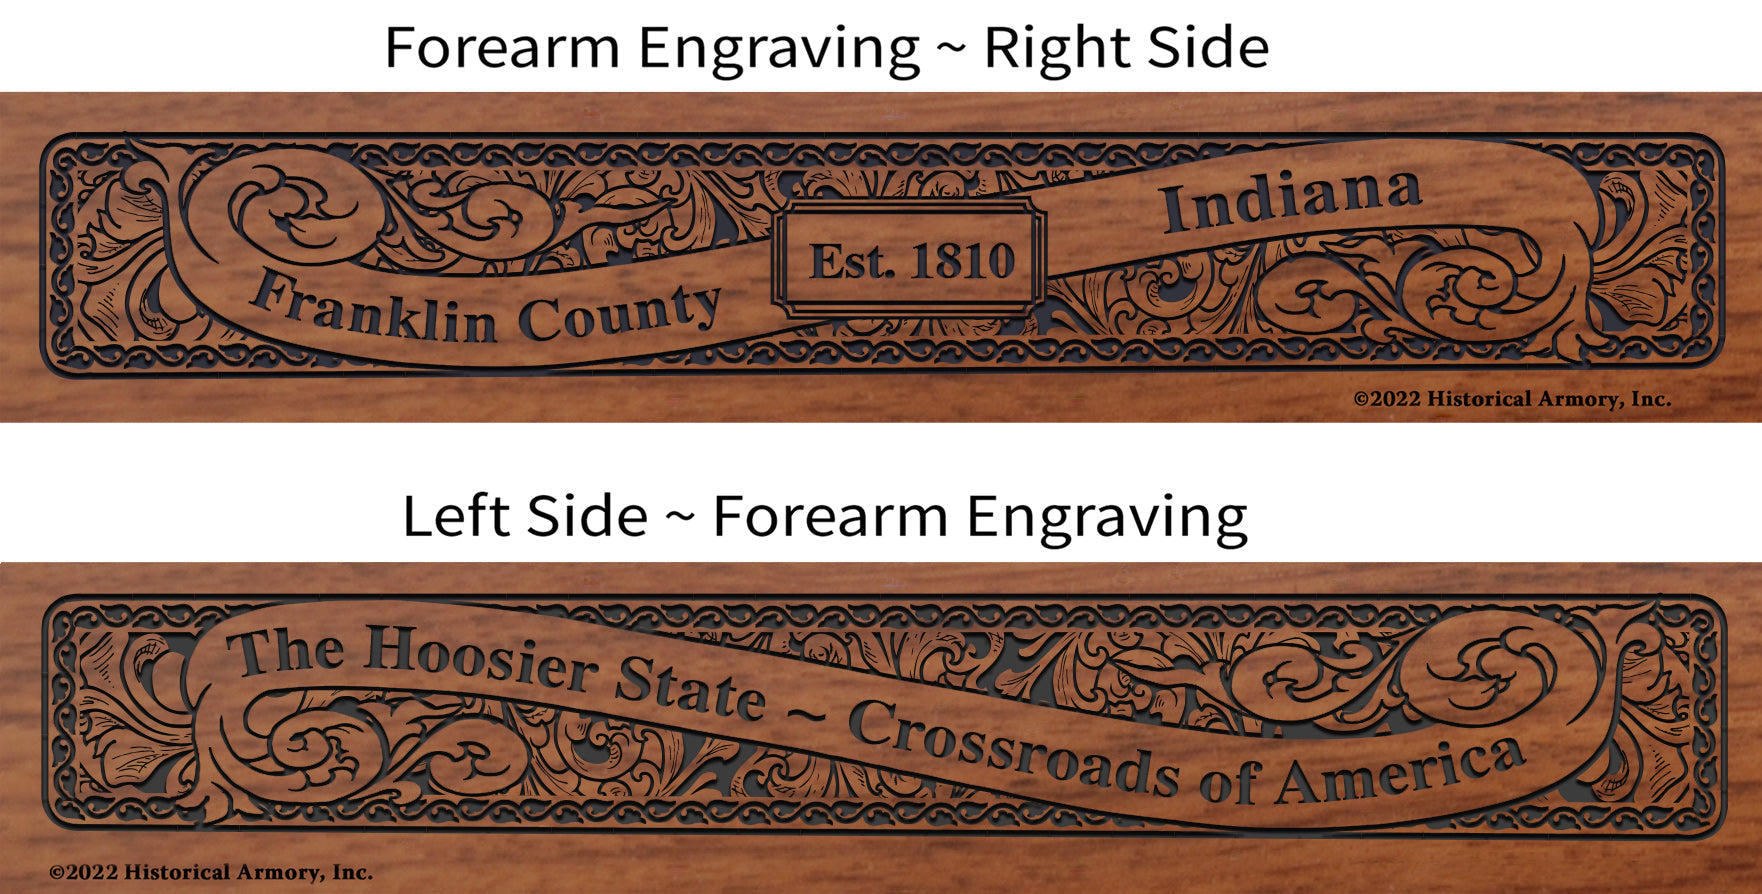 Franklin County Indiana Engraved Rifle Forearm